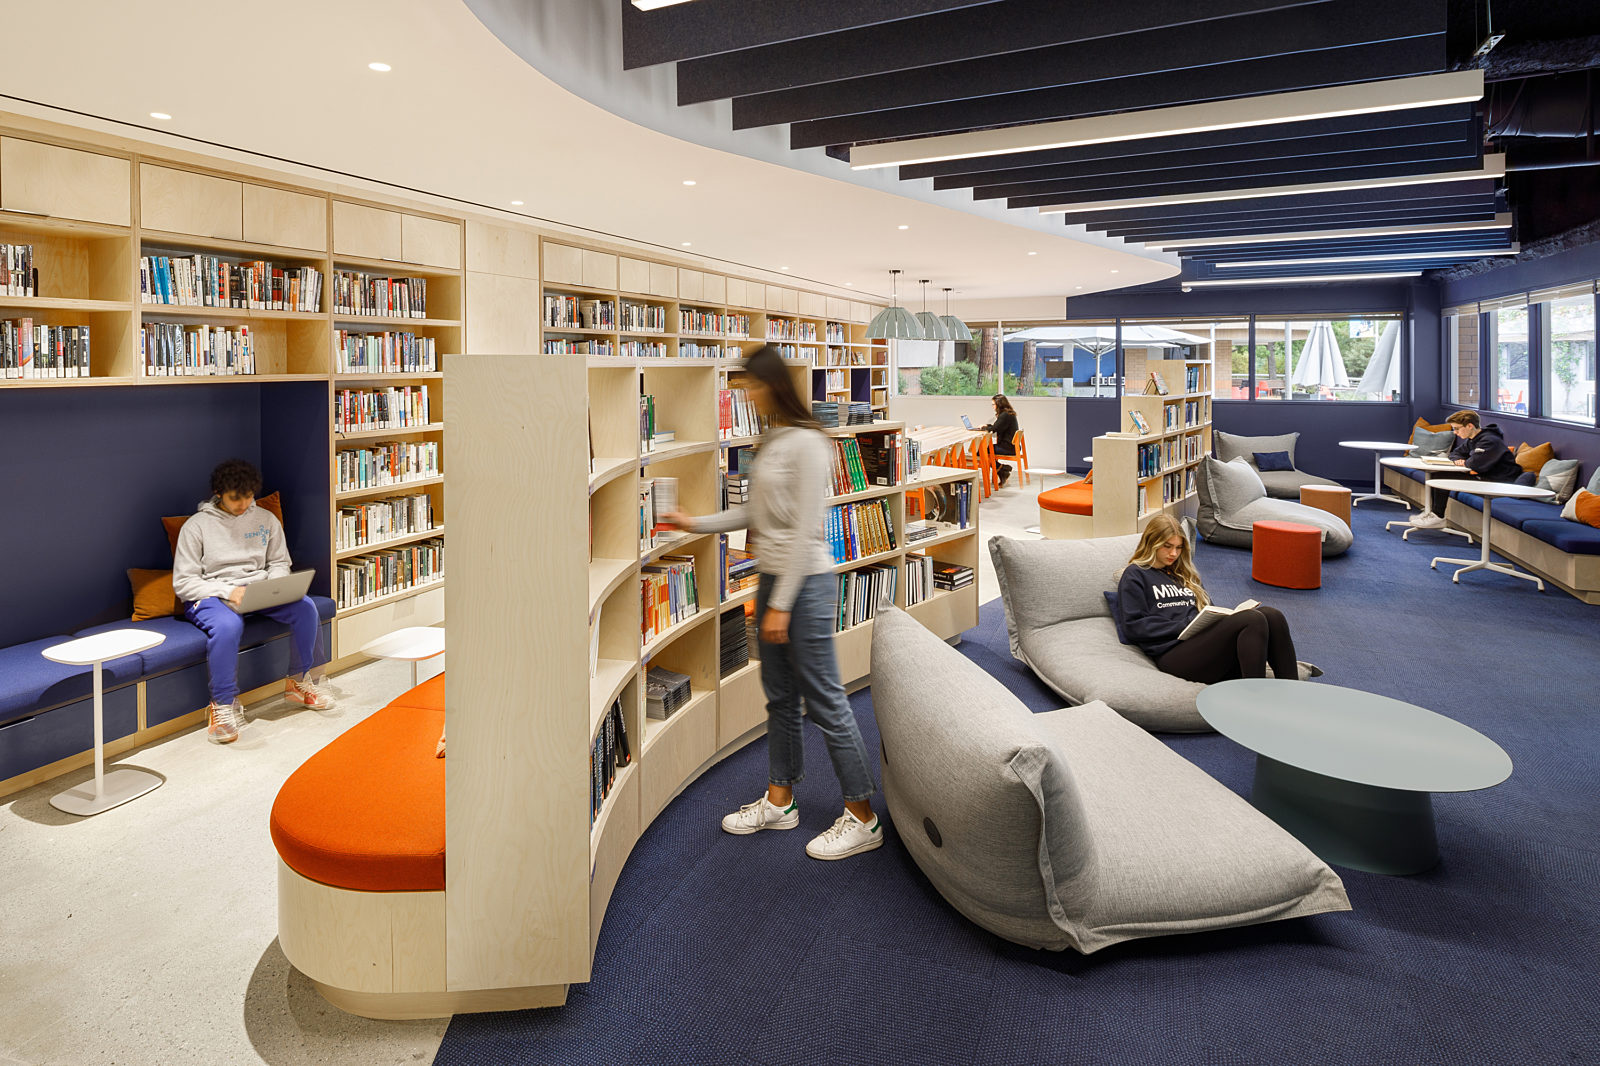 In the open reading area, custom bookshelf booths offer cozy seating along with lounge chairs and coffee tables, all situated on a dark blue carpet.